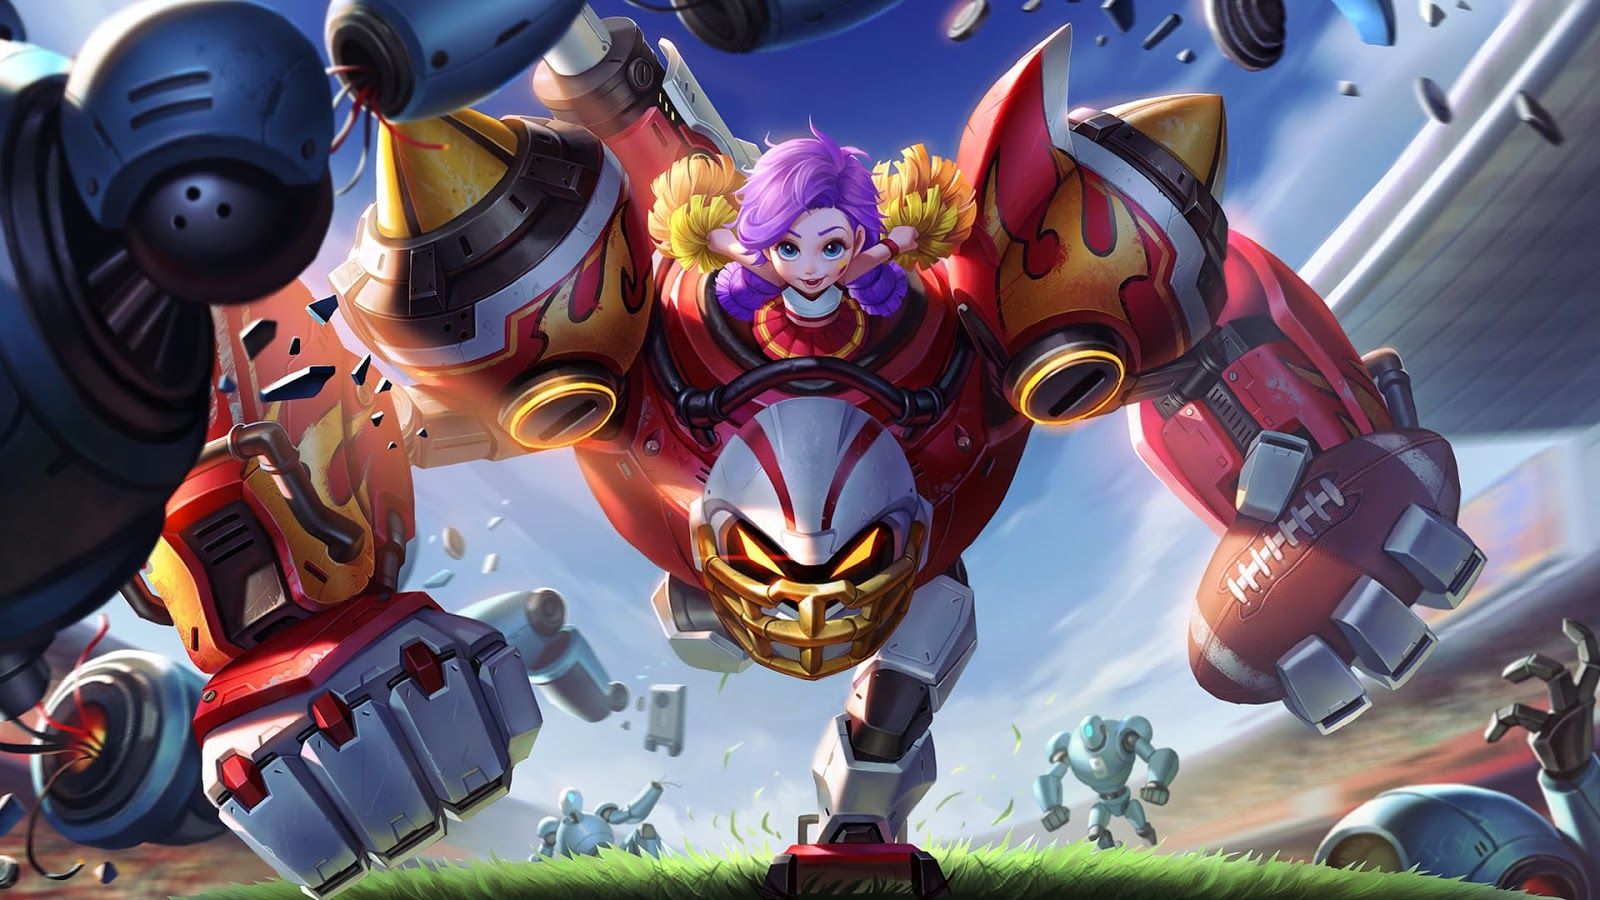 Wallpaper Jawhead Mobile Legends Full HD for PC, Android & iOS